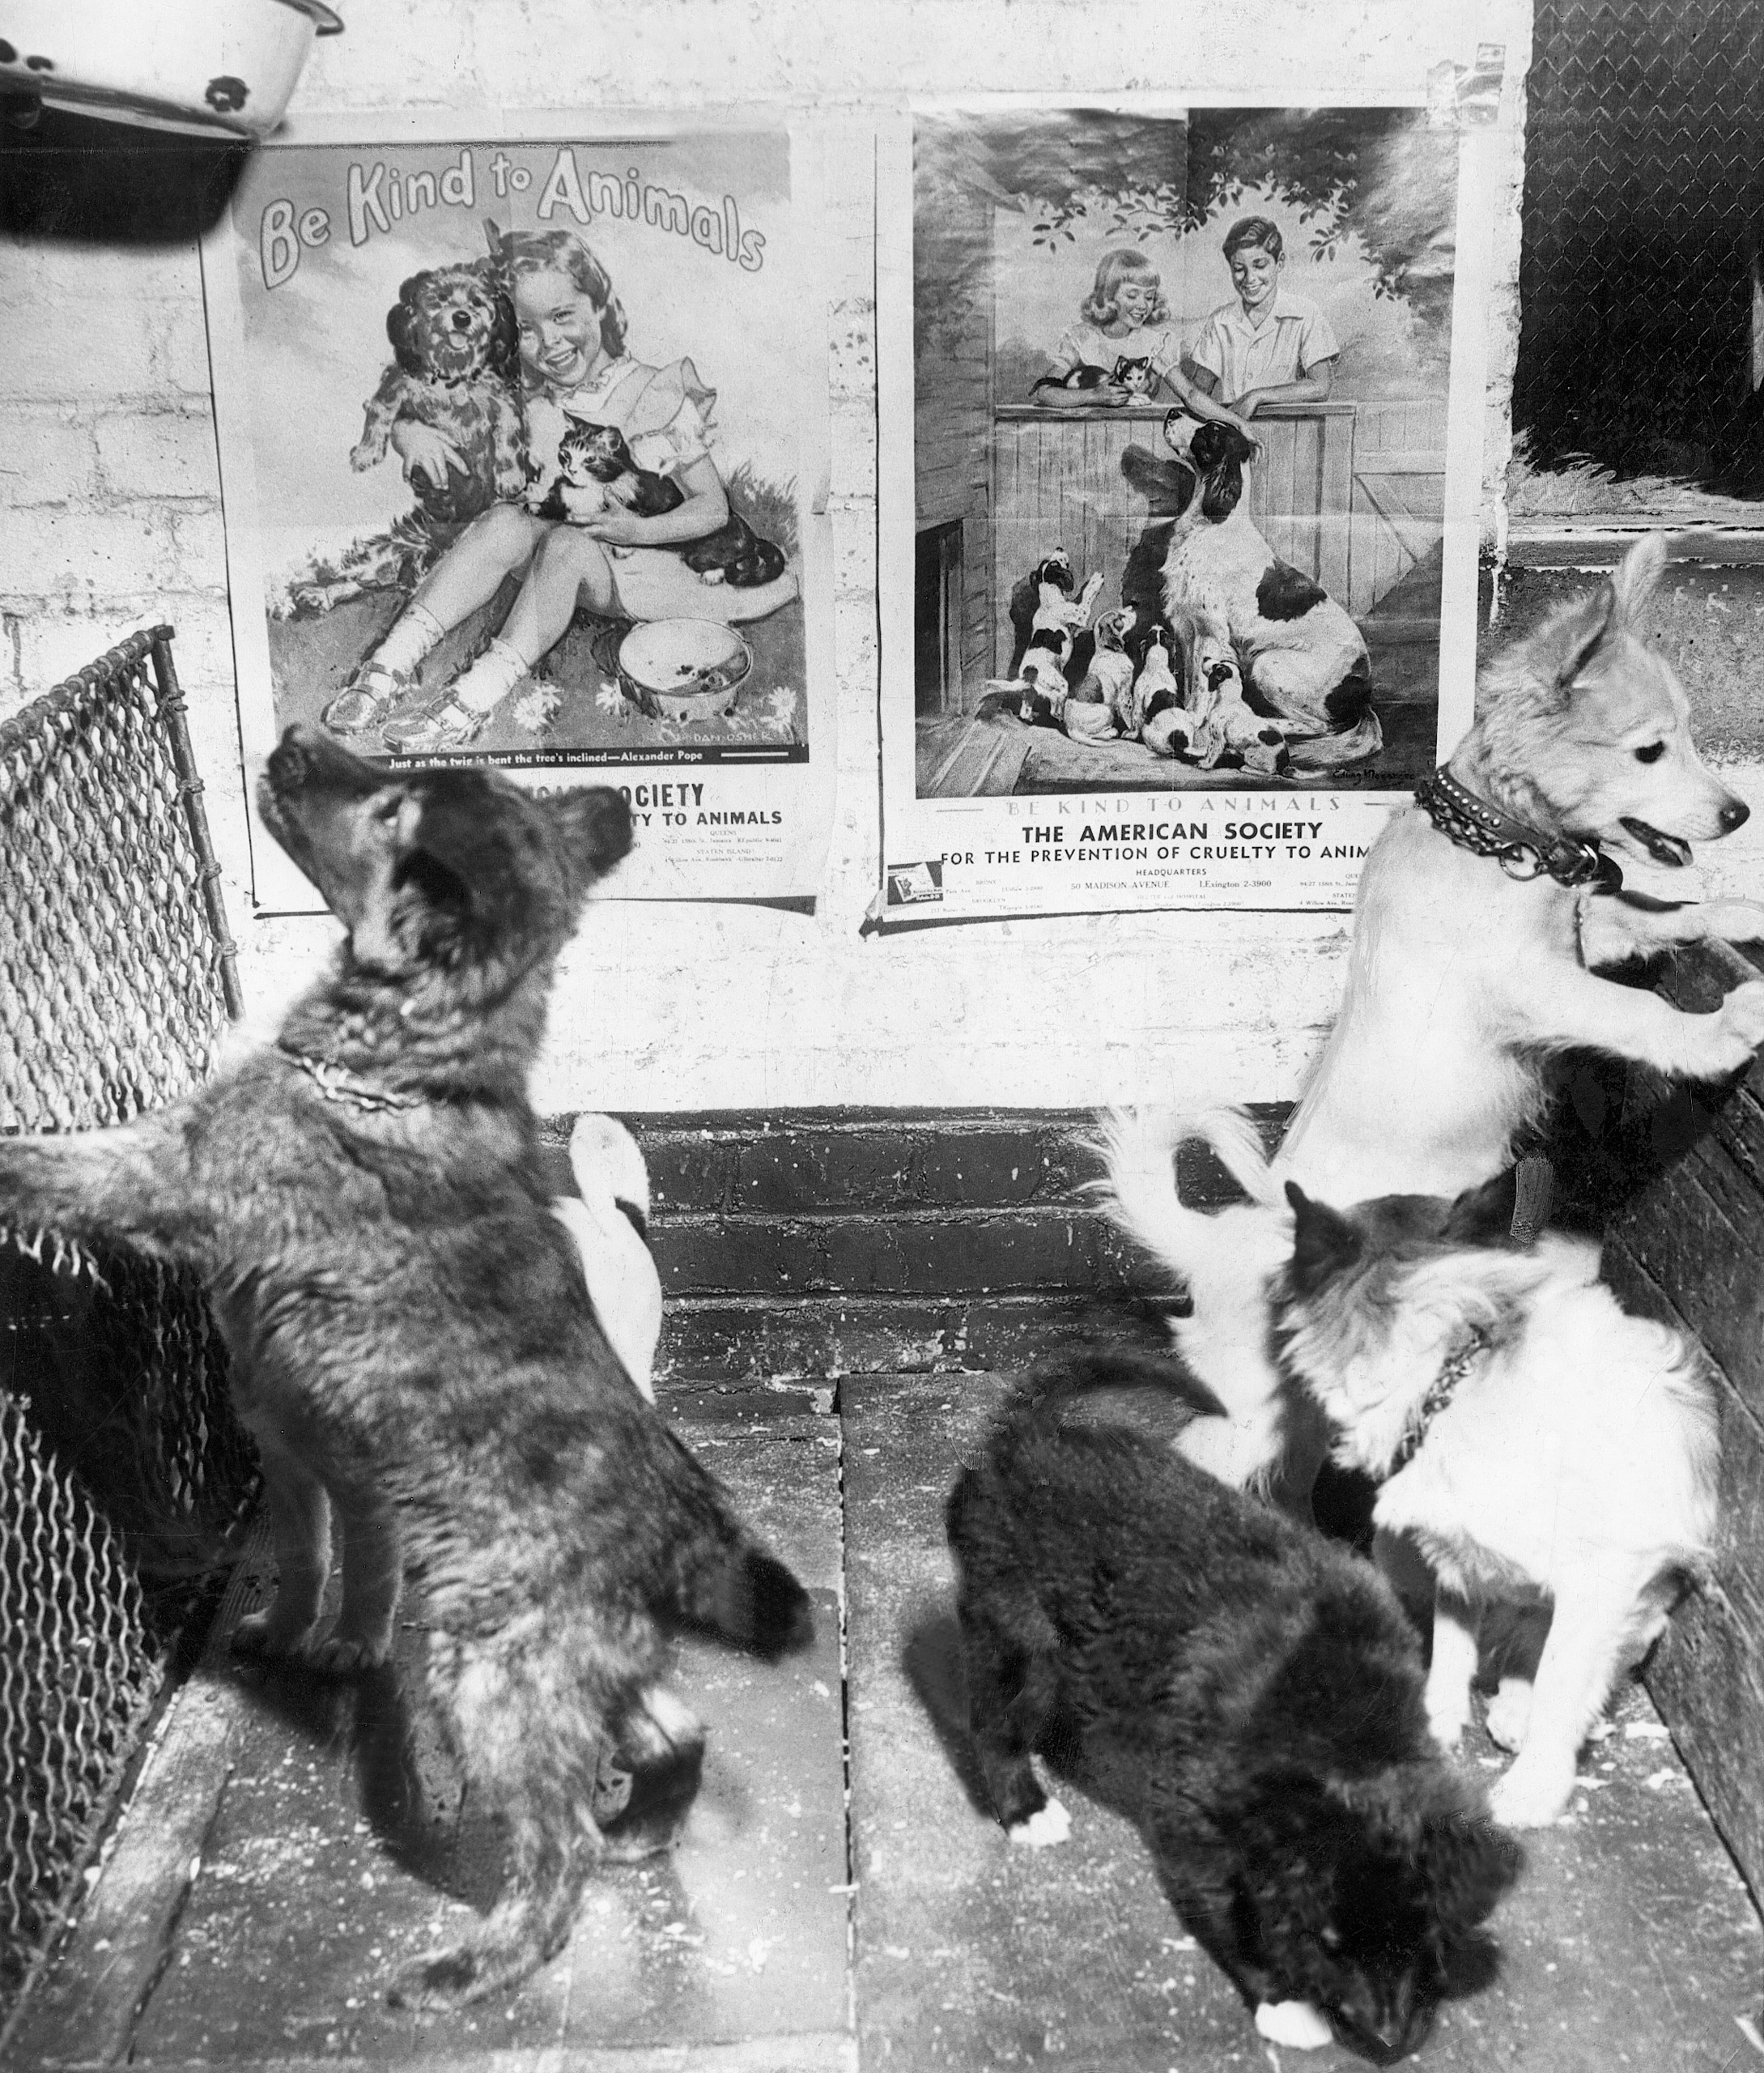 Puppies for adoption at ASPCA Animal Shelter in NYC with humane-themed posters, 1950s